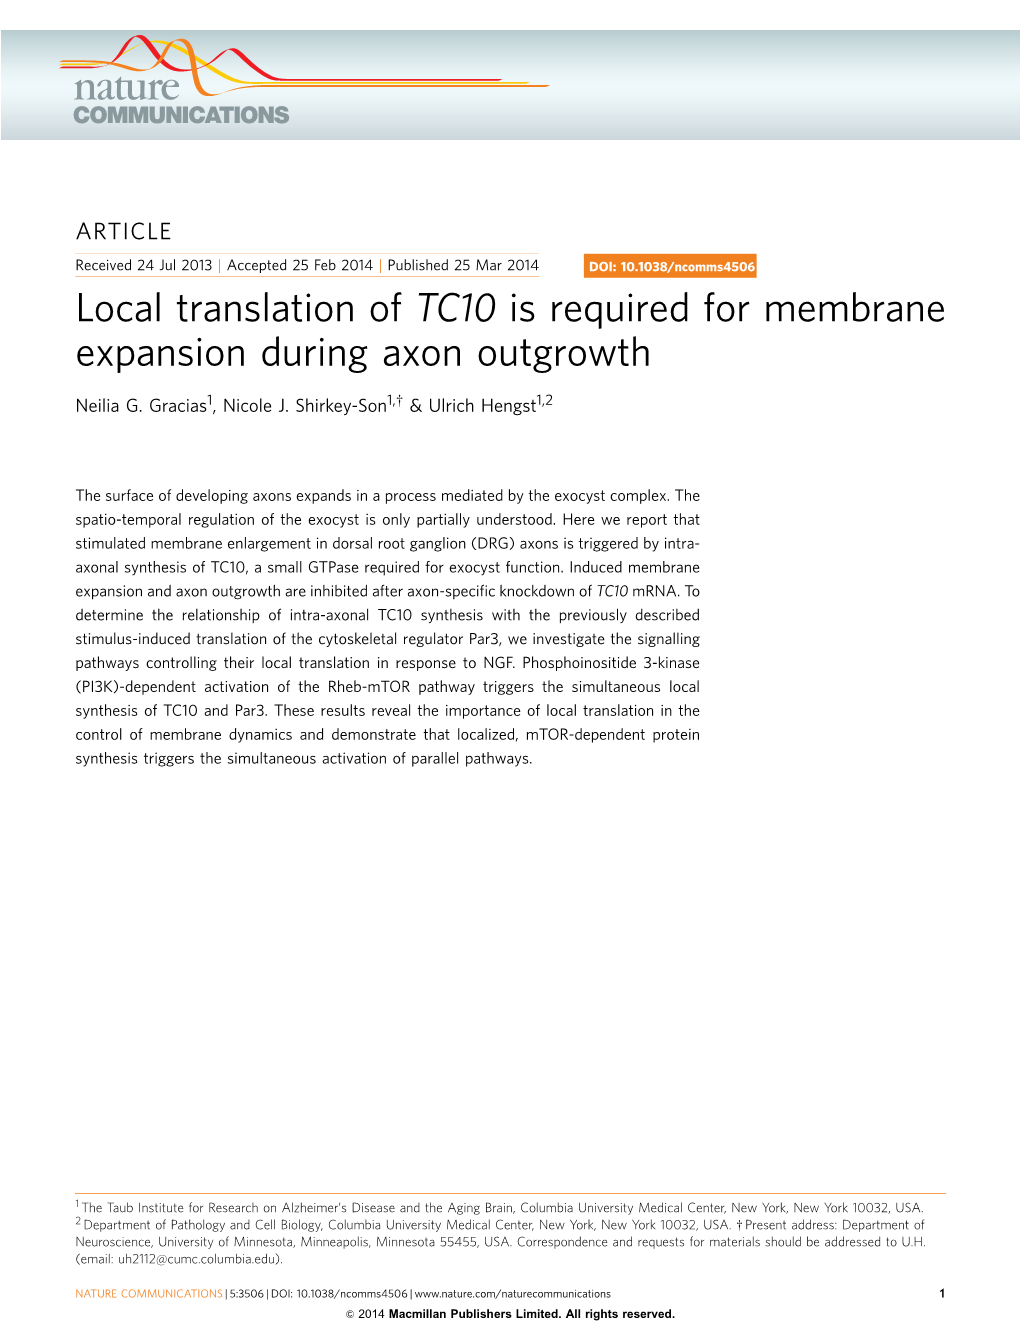 TC10 Is Required for Membrane Expansion During Axon Outgrowth